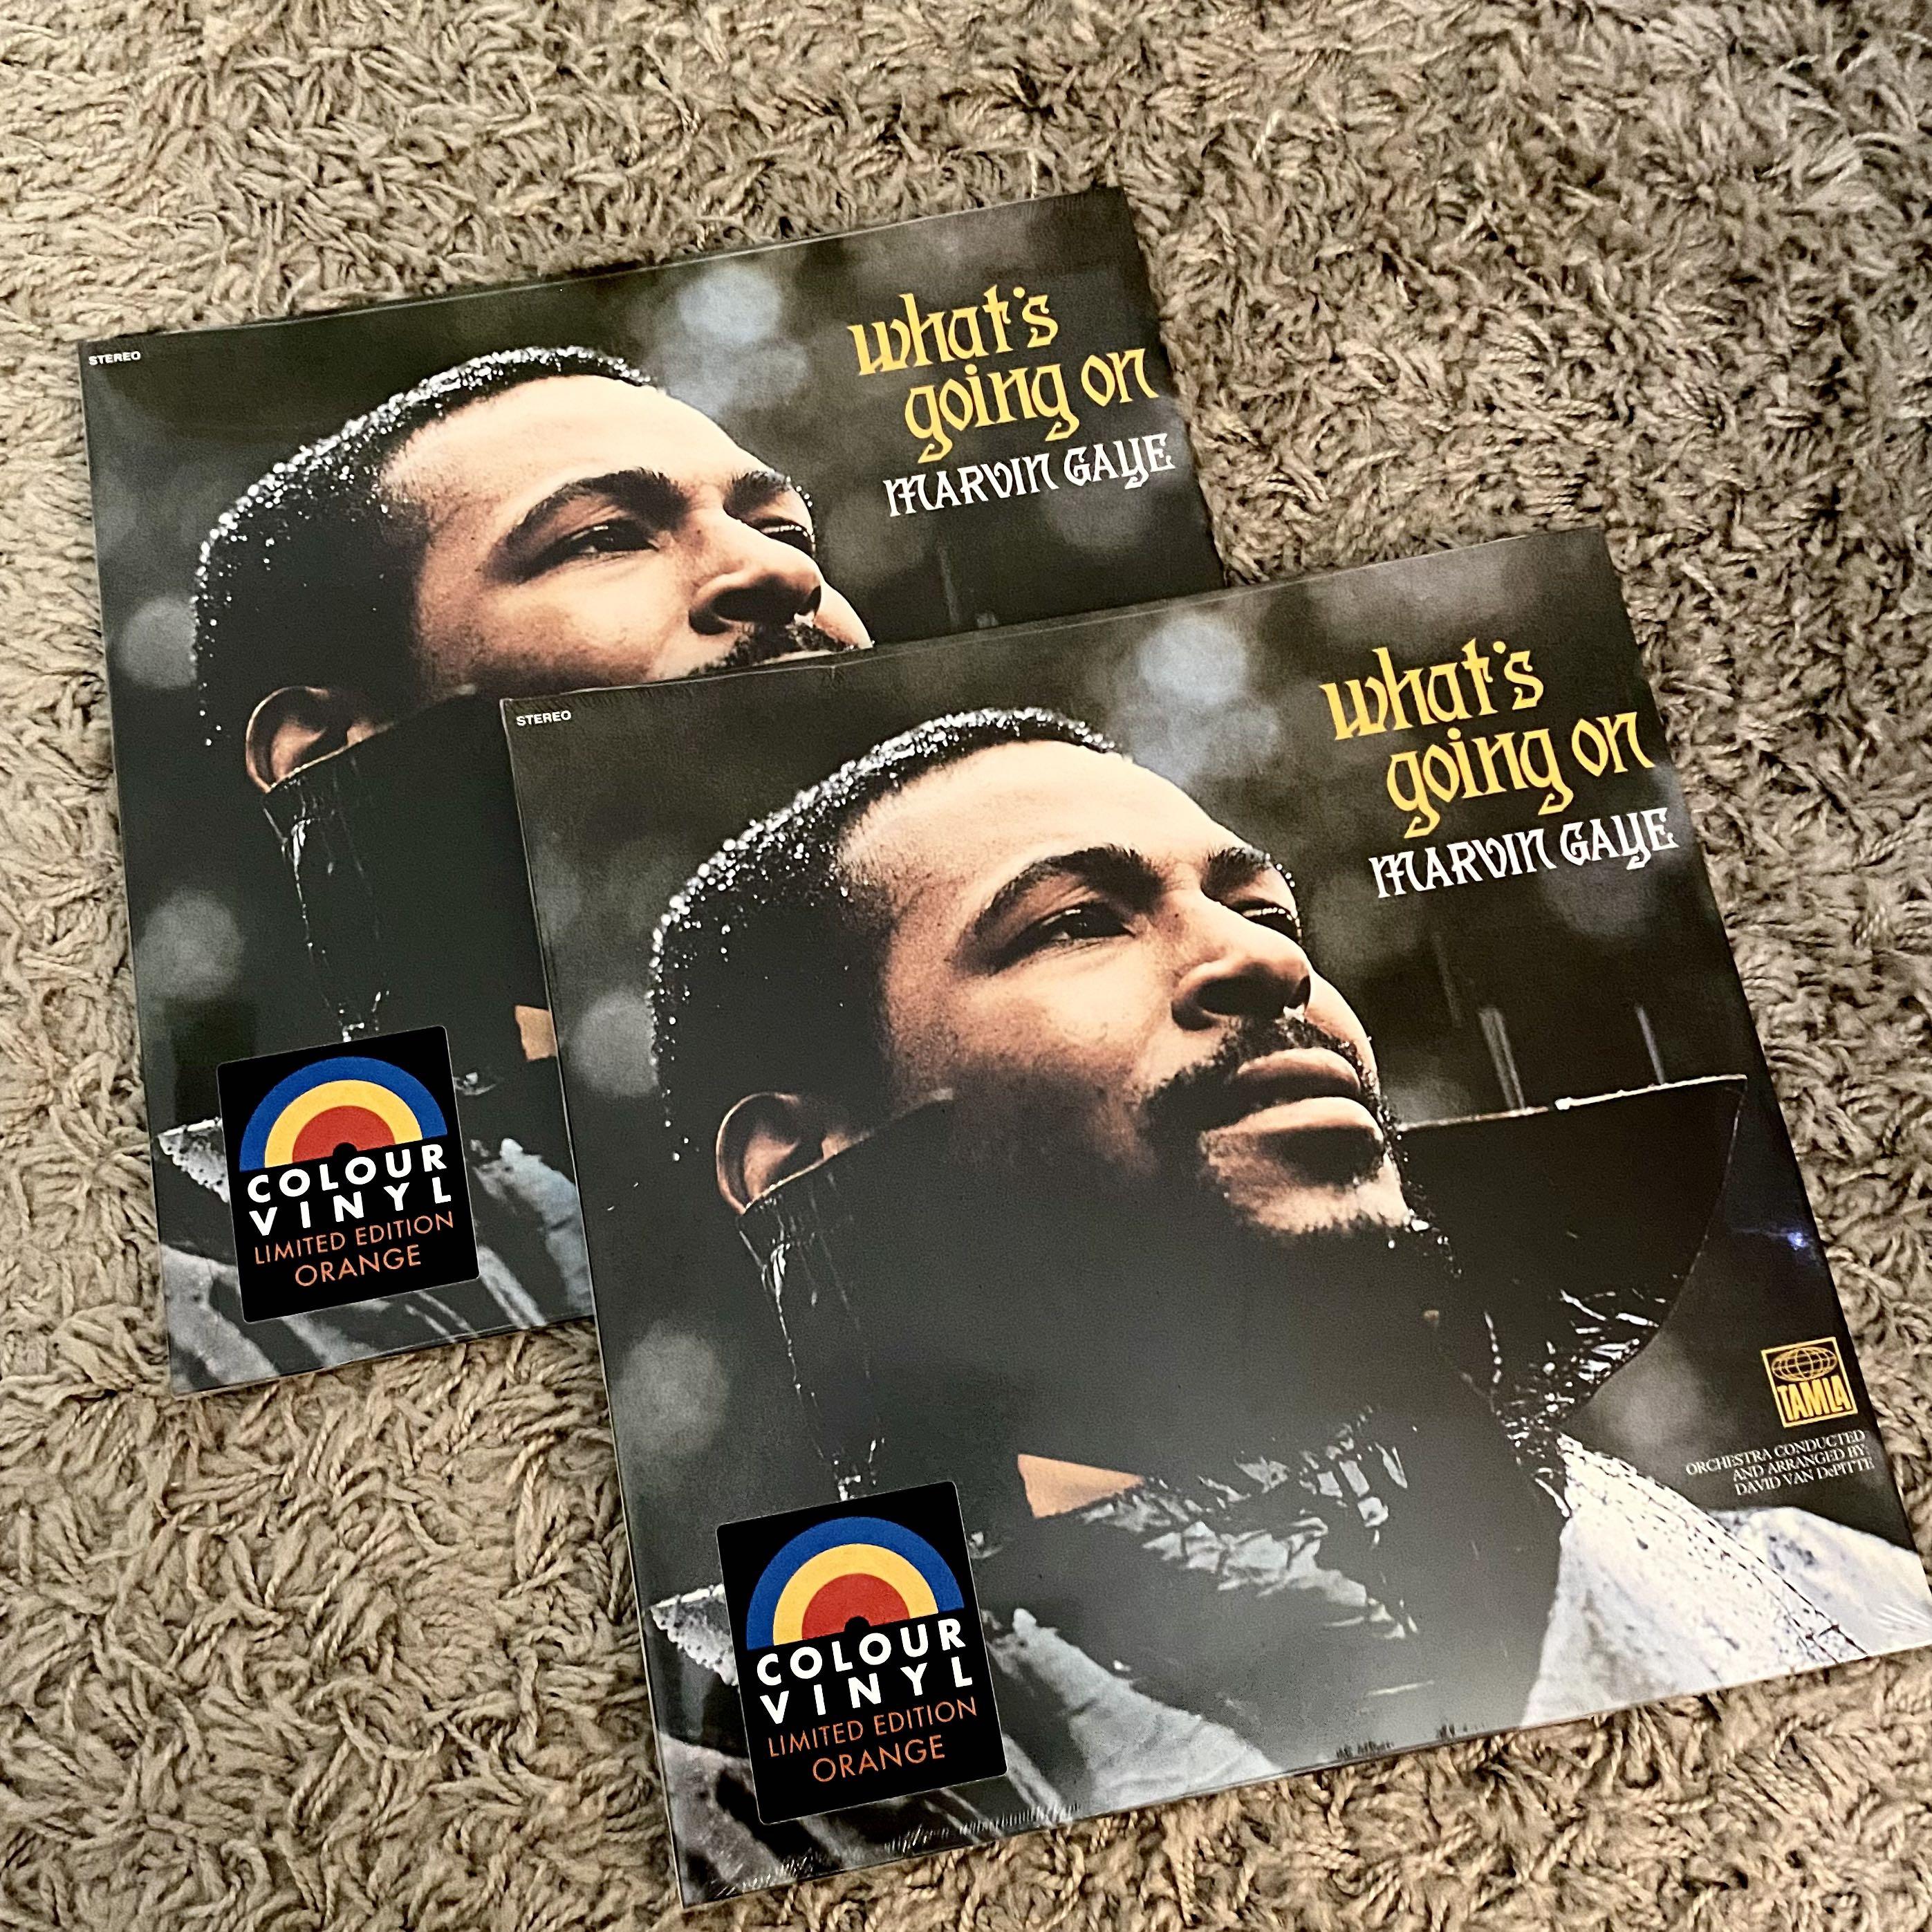 Marvin Gaye - What's Going On - Vinyl (Limited Edition)